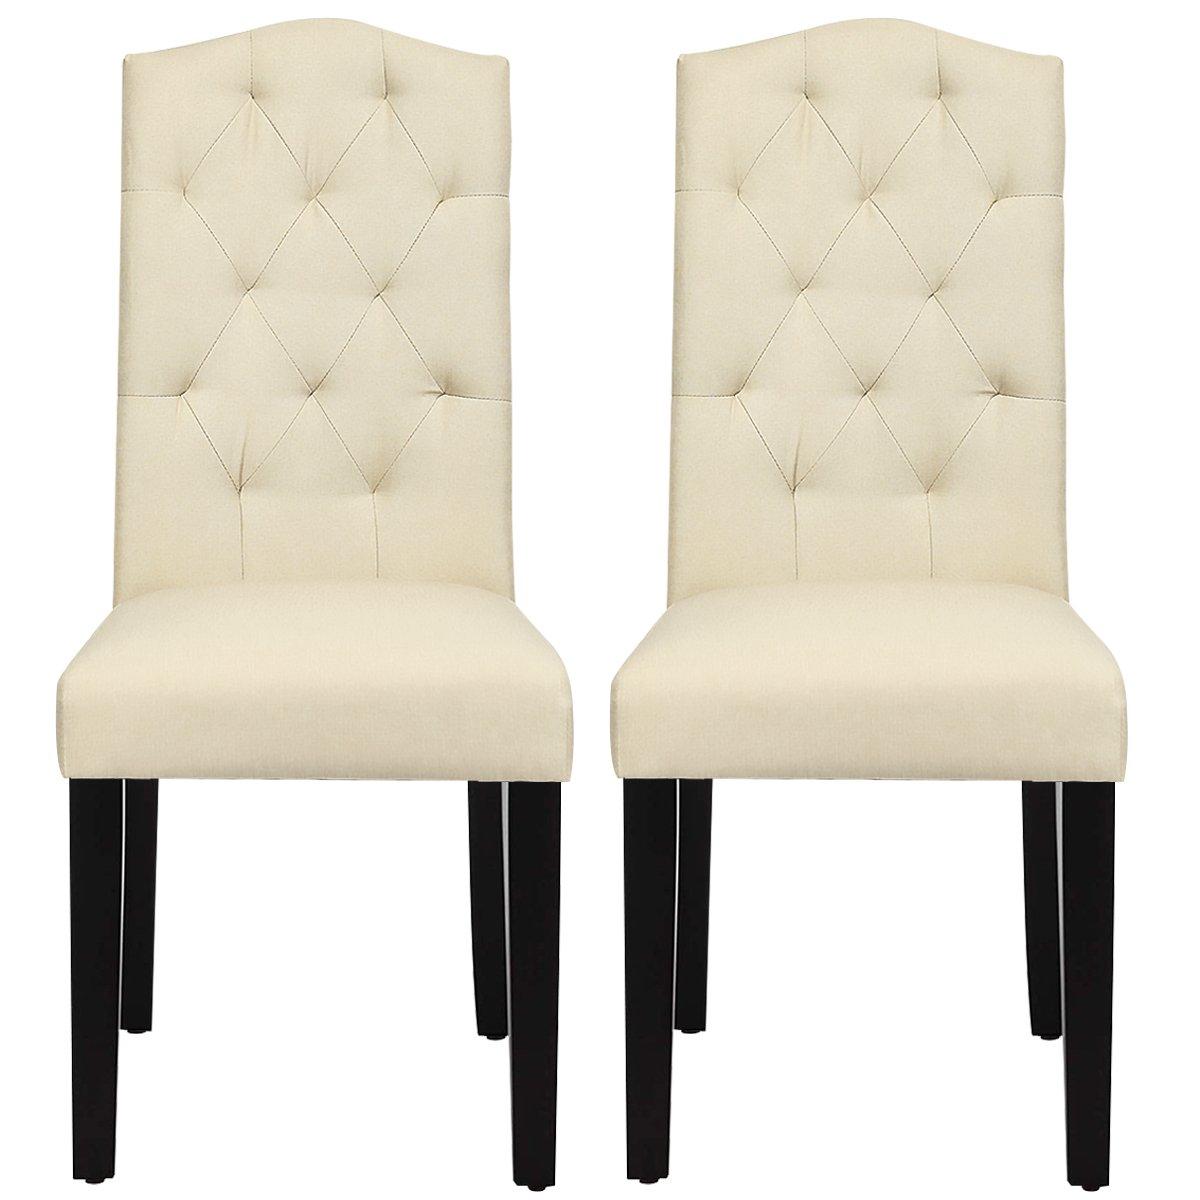 Set of 2 Dining Chairs w/ Ergonomic High Backrest Upholstered Fabric Leisure Chair